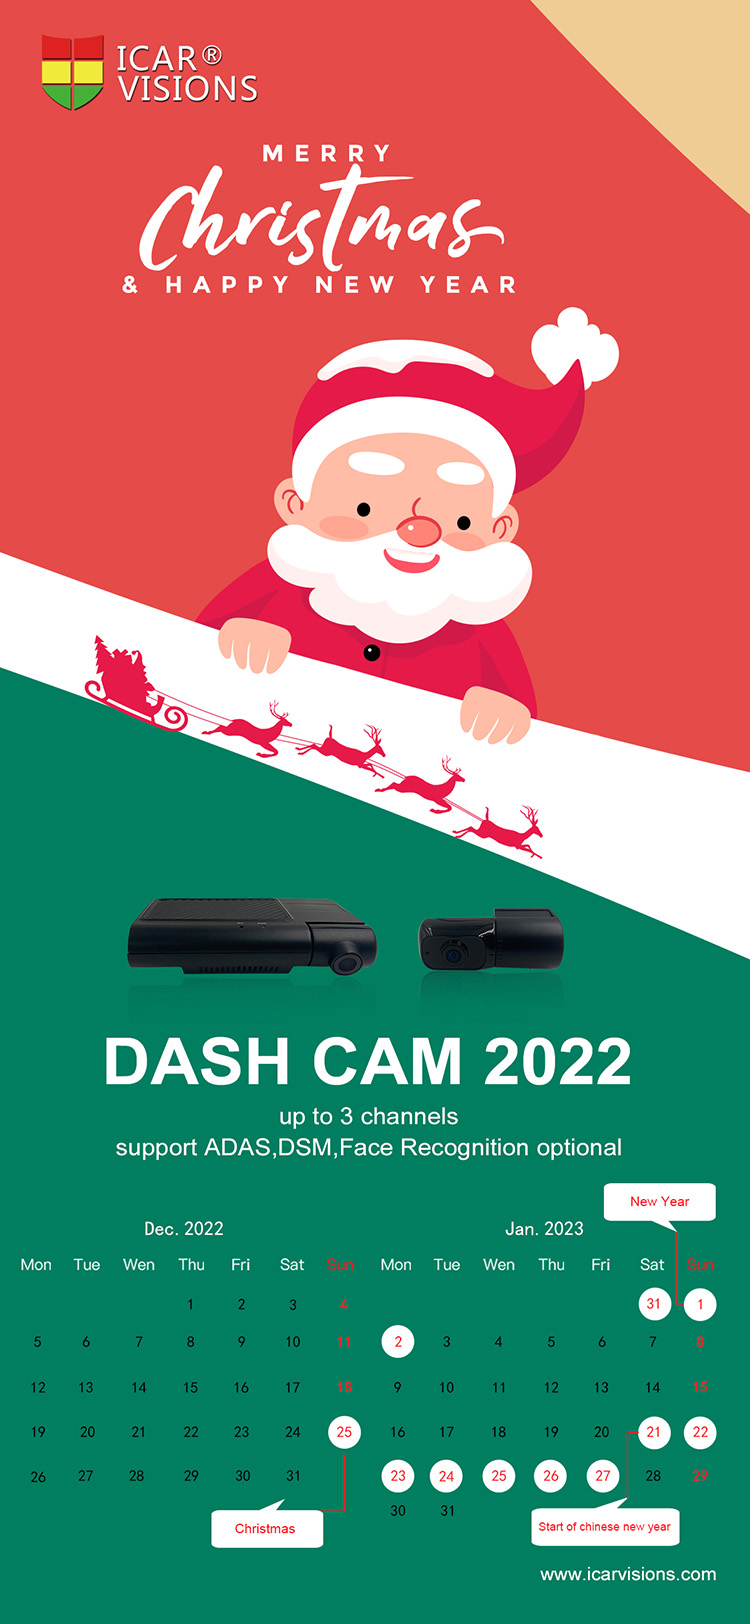 Merry Christmas from ICAR 2022 Picture1